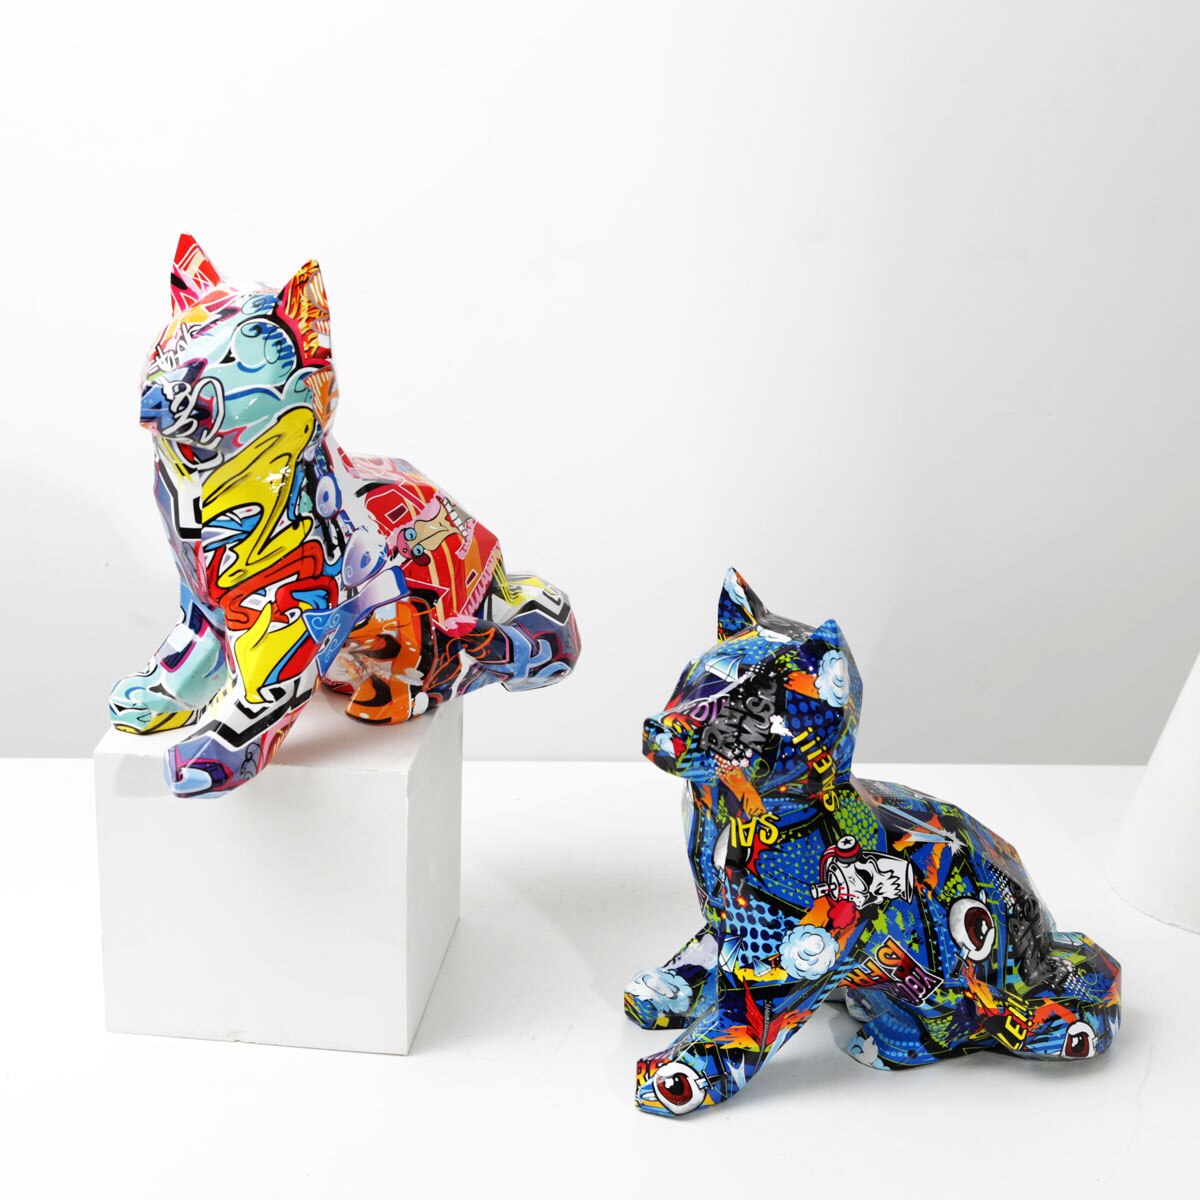 Abstract Shiba Inu Sculpture - Floral Fawna